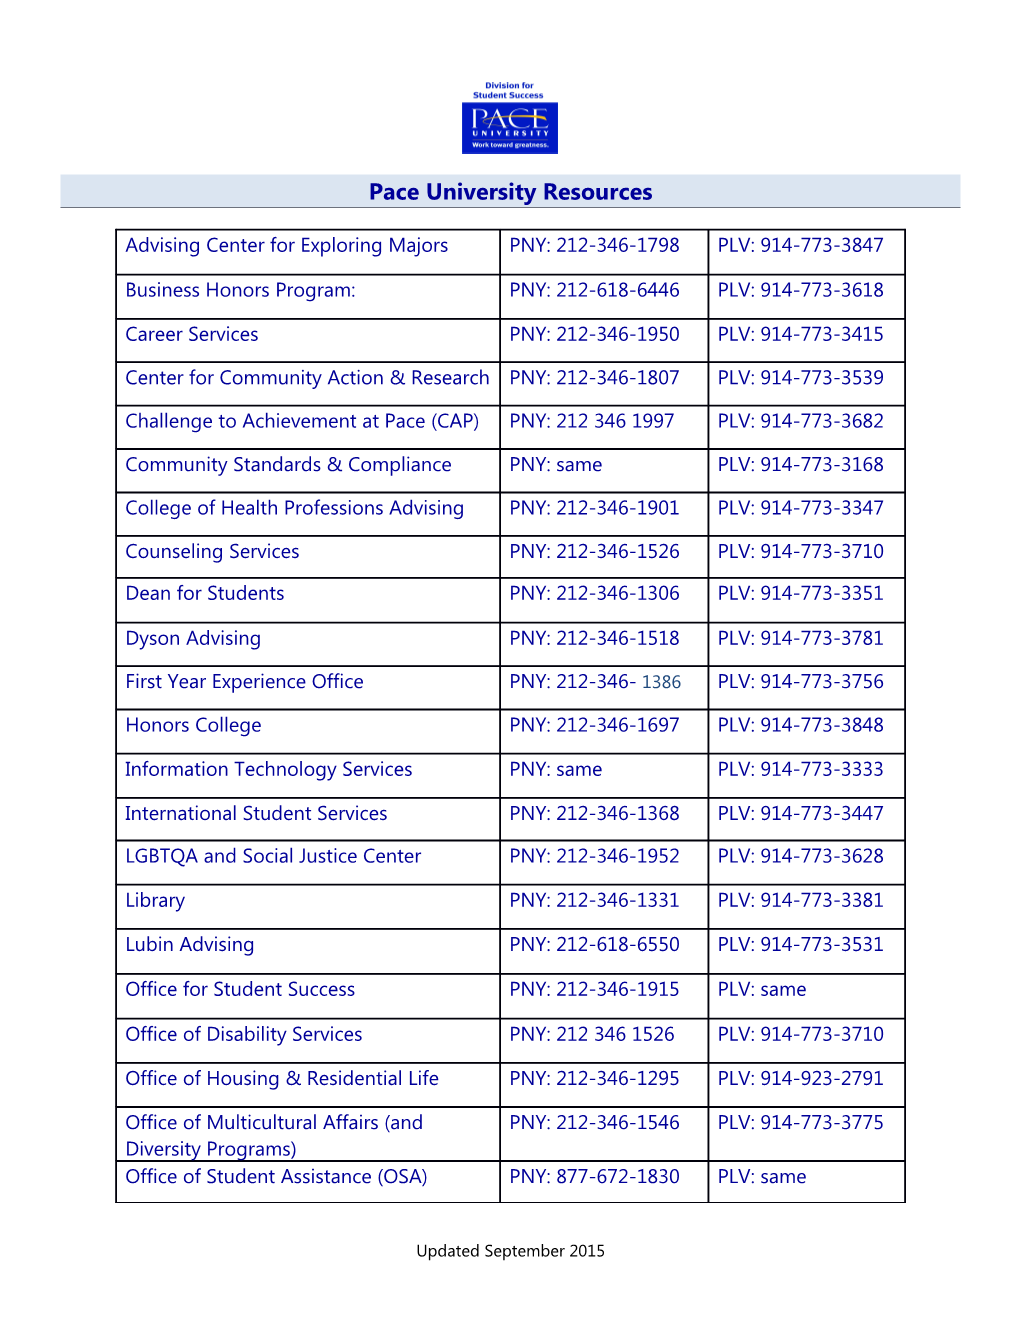 Pace University Resources s1